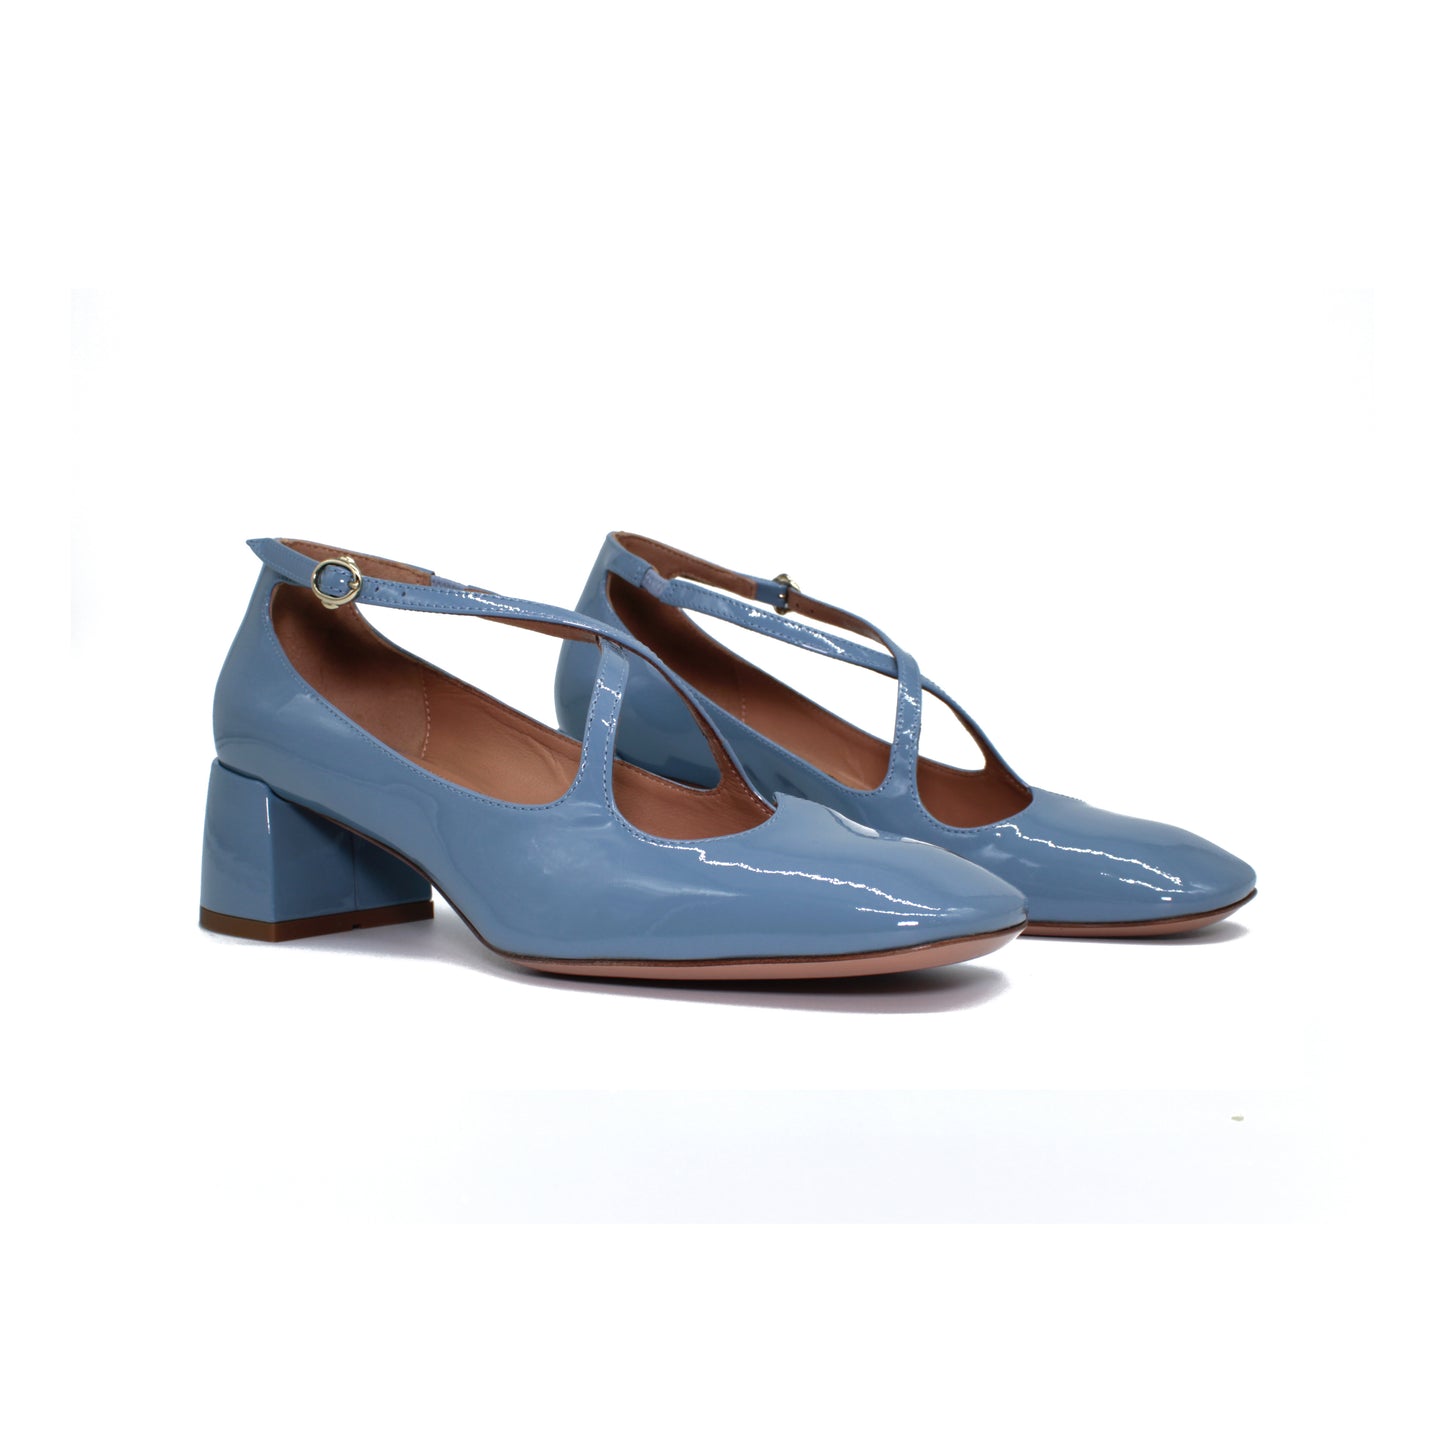 Pump Two for Love in smoky blue patent leather